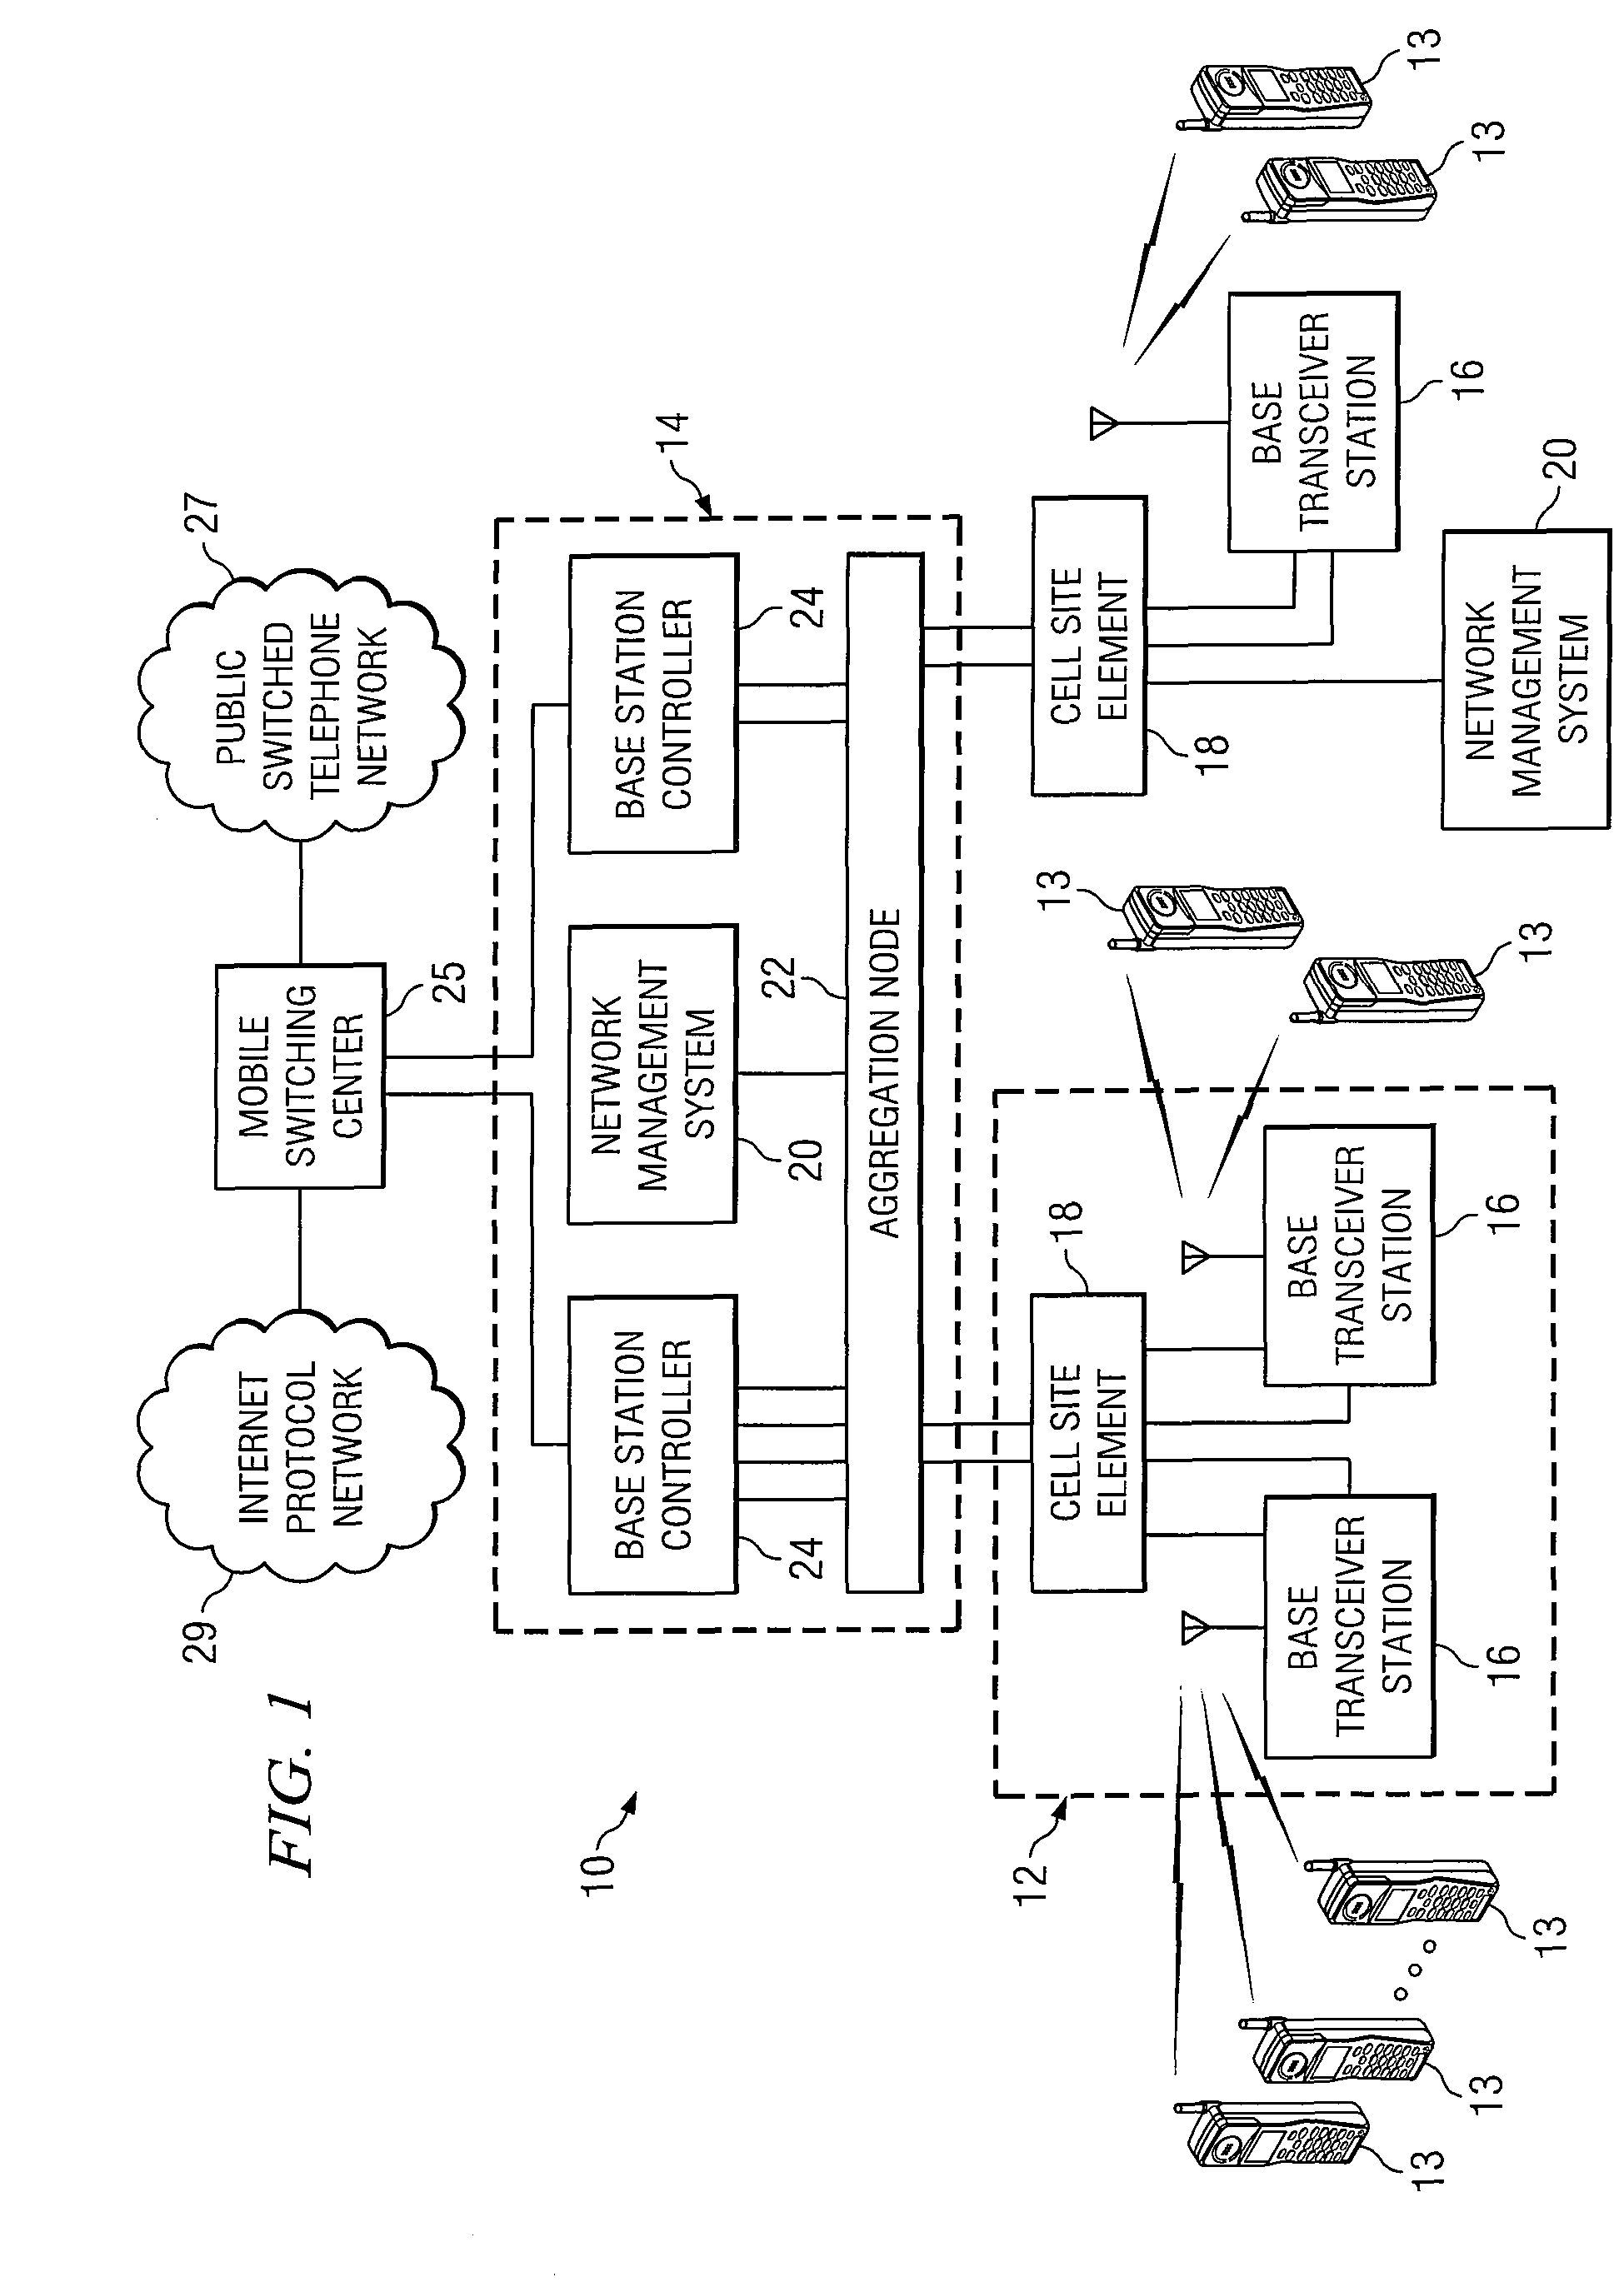 System and method for detecting and regulating congestion in a communications environment